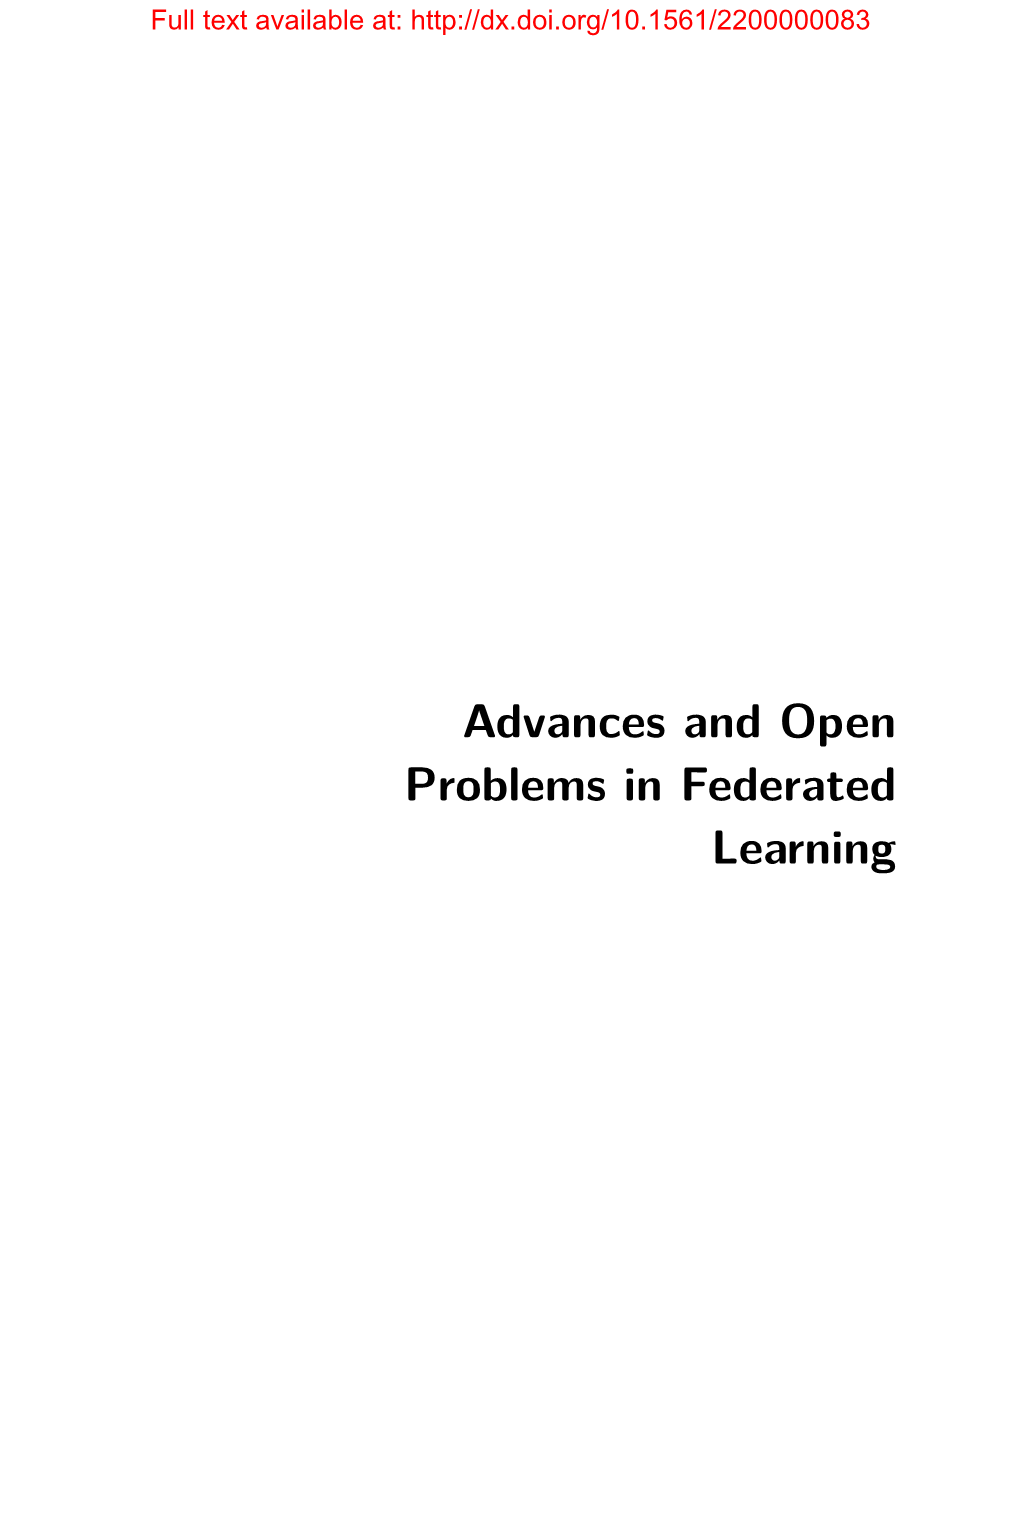 Advances and Open Problems in Federated Learning Full Text Available At